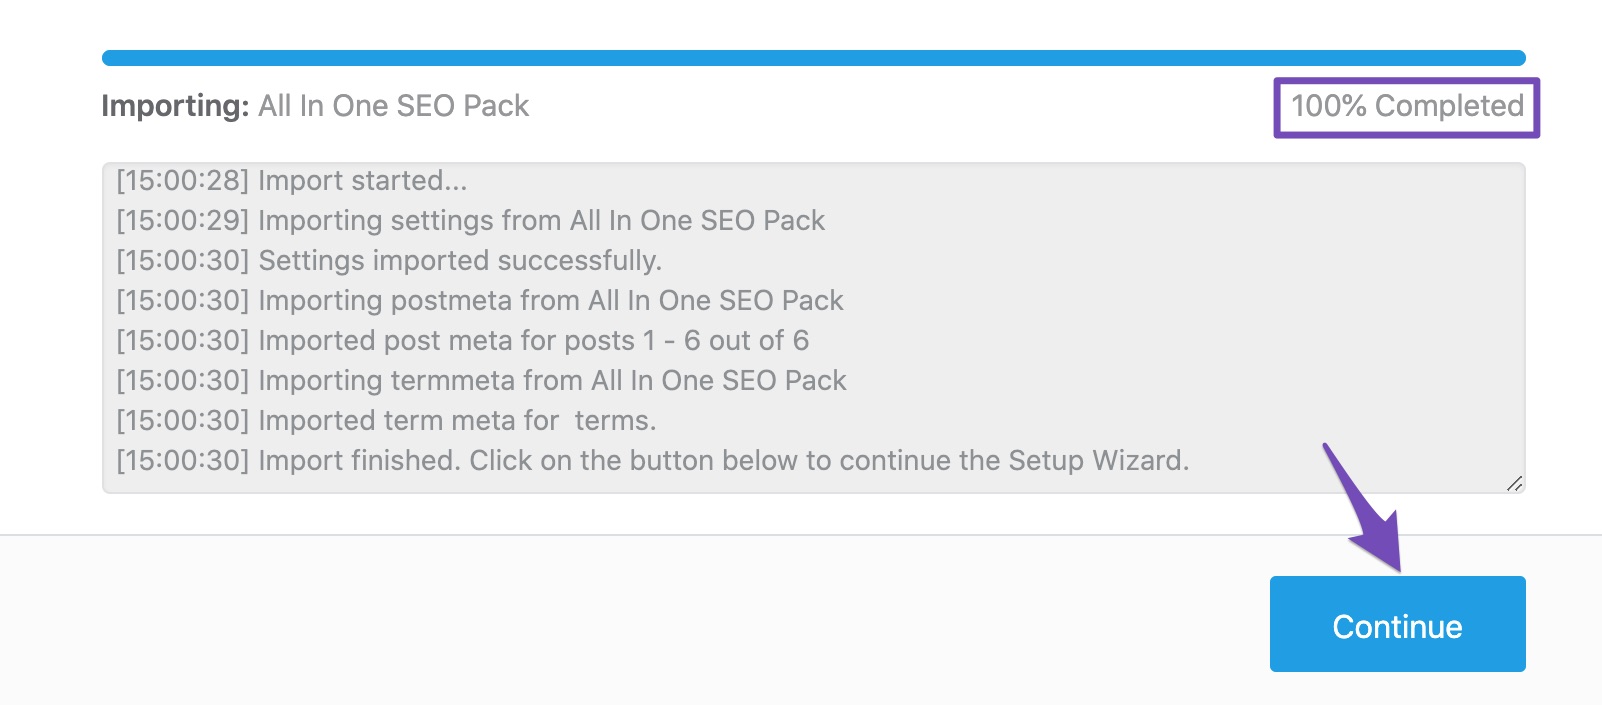 Importing data from All In One SEO Pack completed